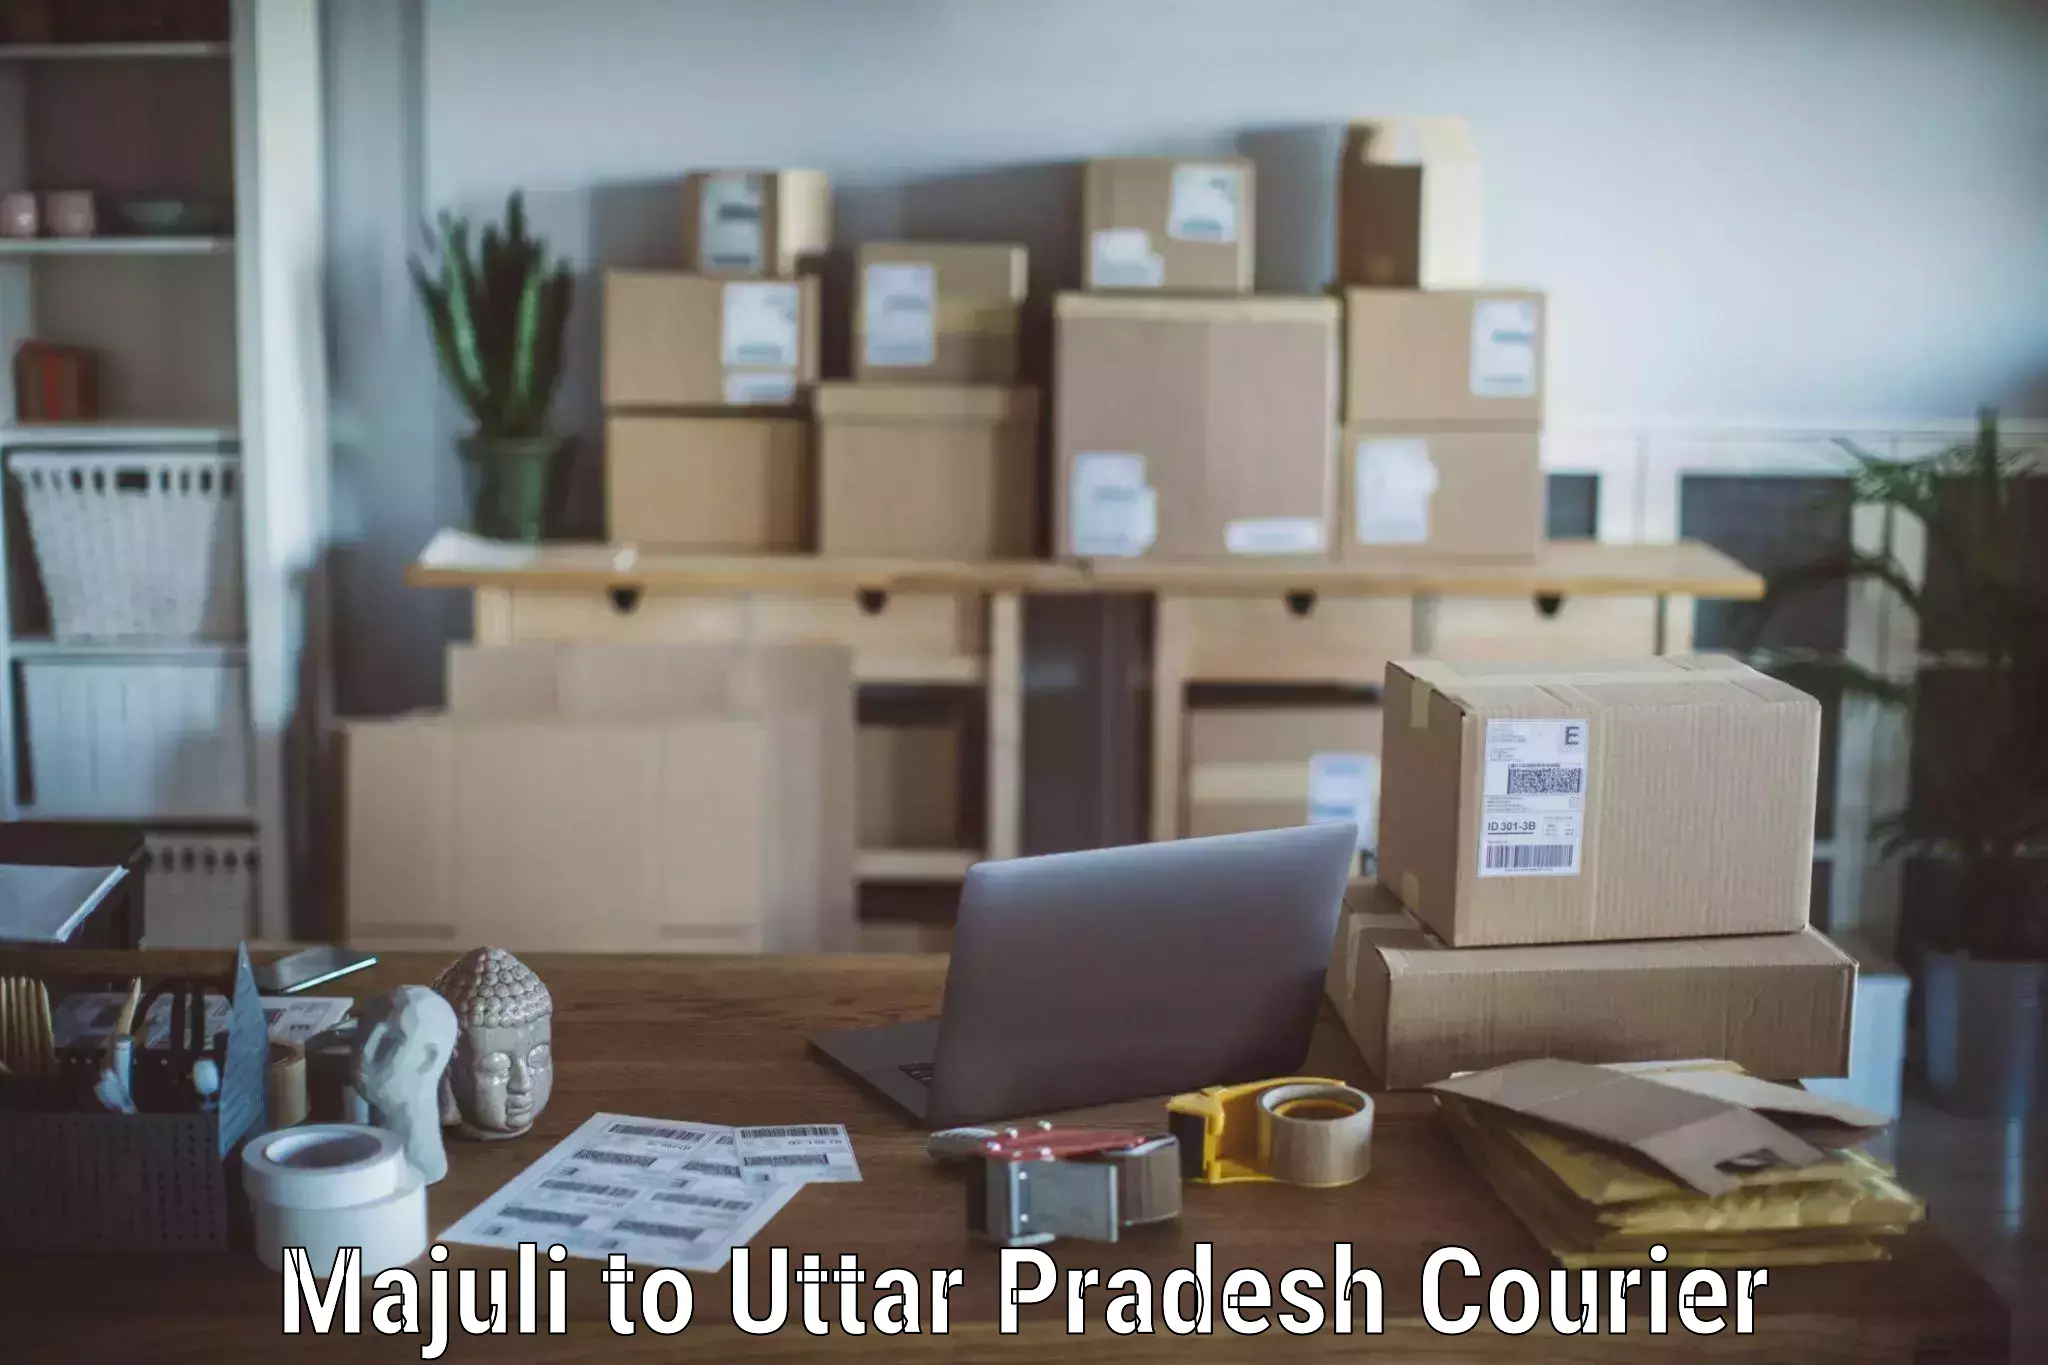 Hassle-free relocation Majuli to Ghaziabad